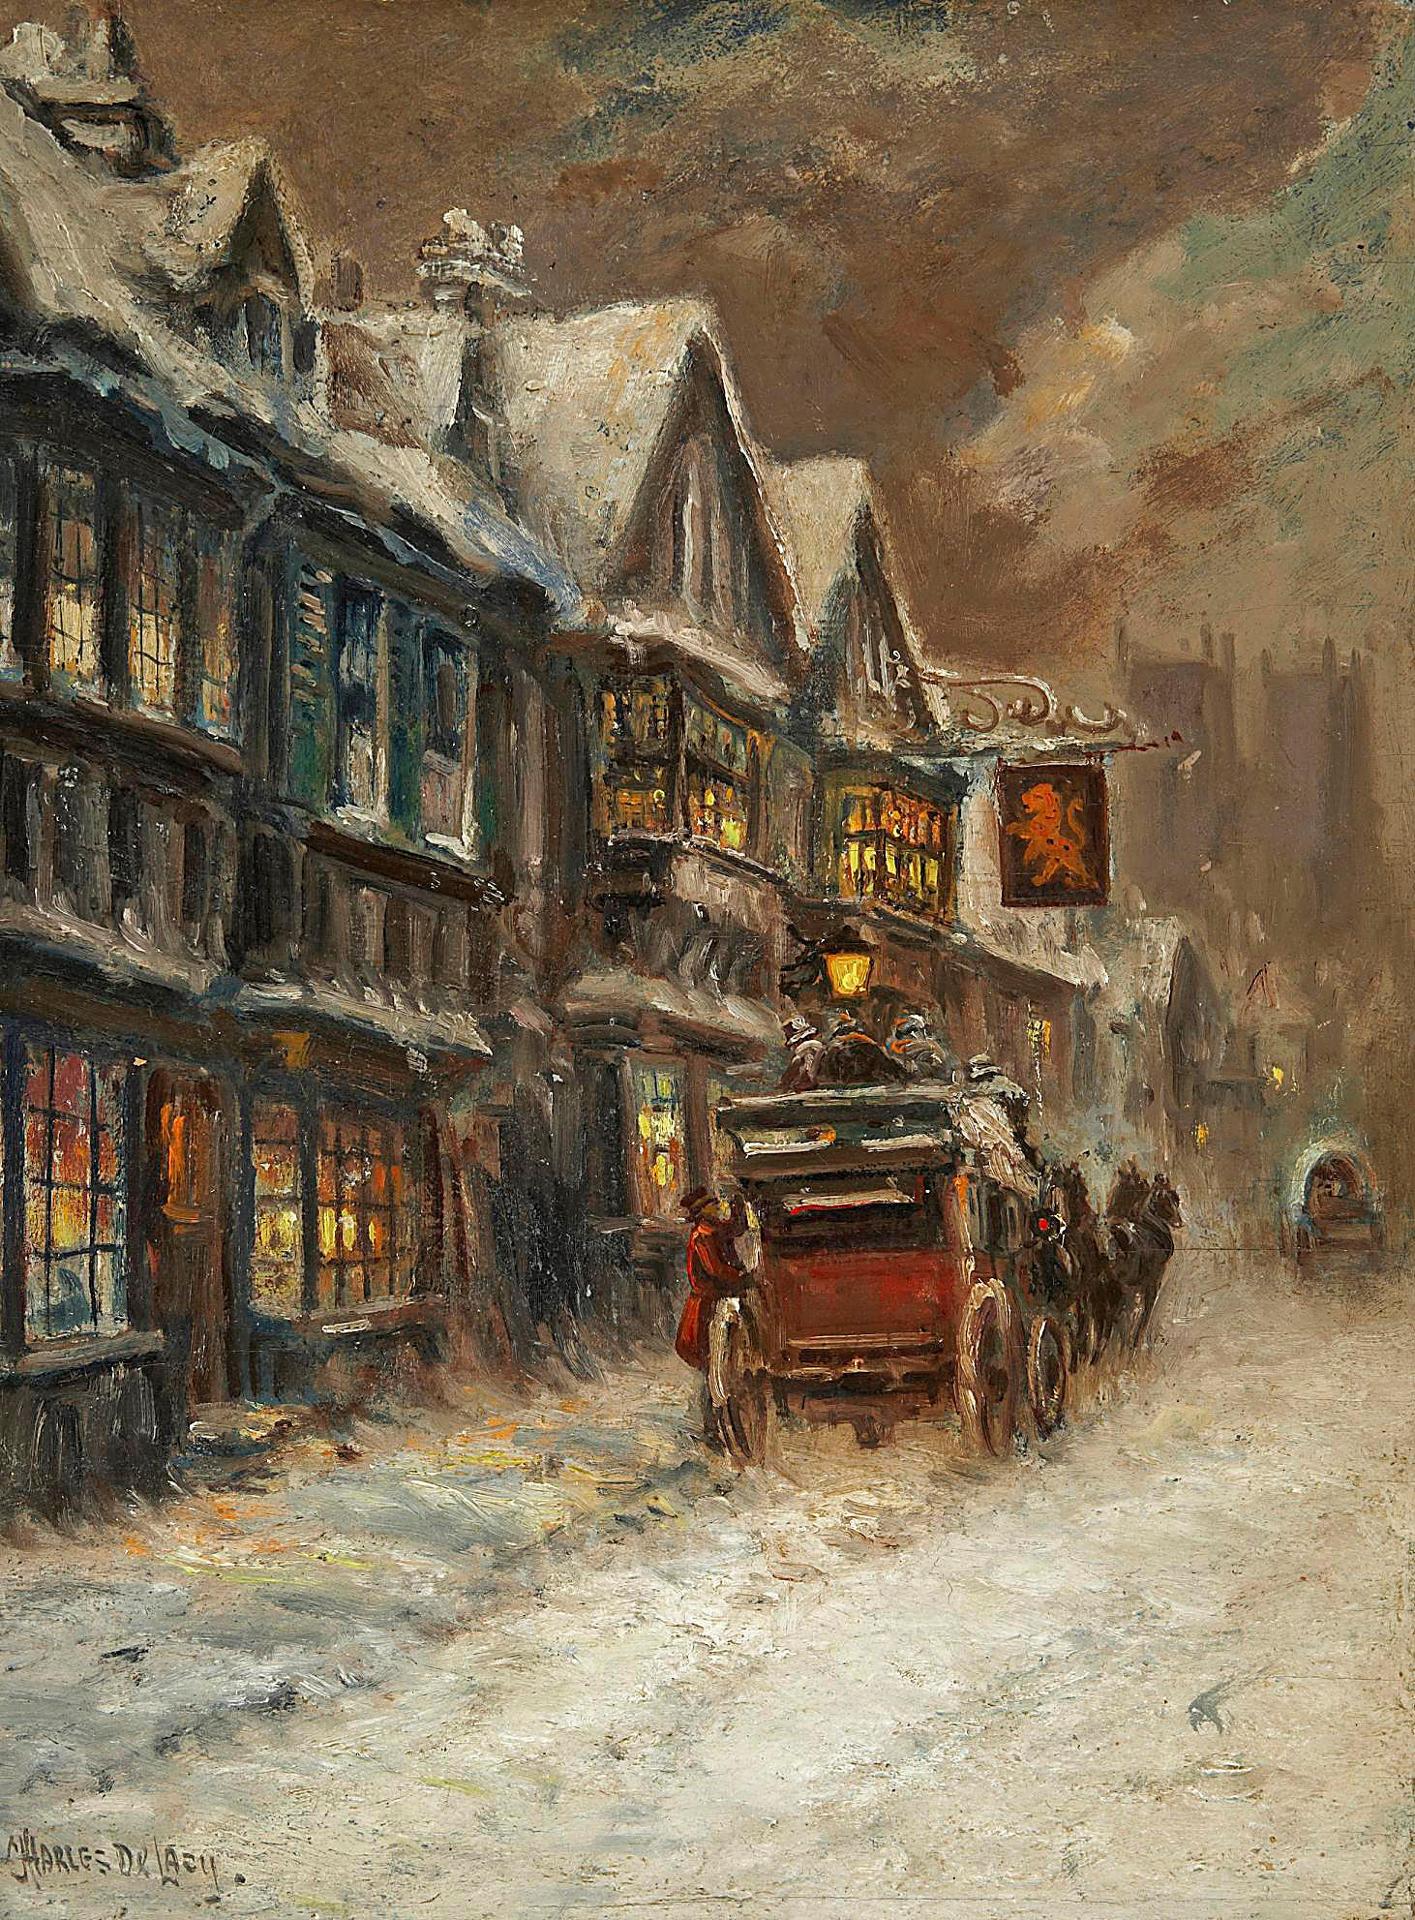 Charles John de Lacy (1856-1929) - The Winter Carriage